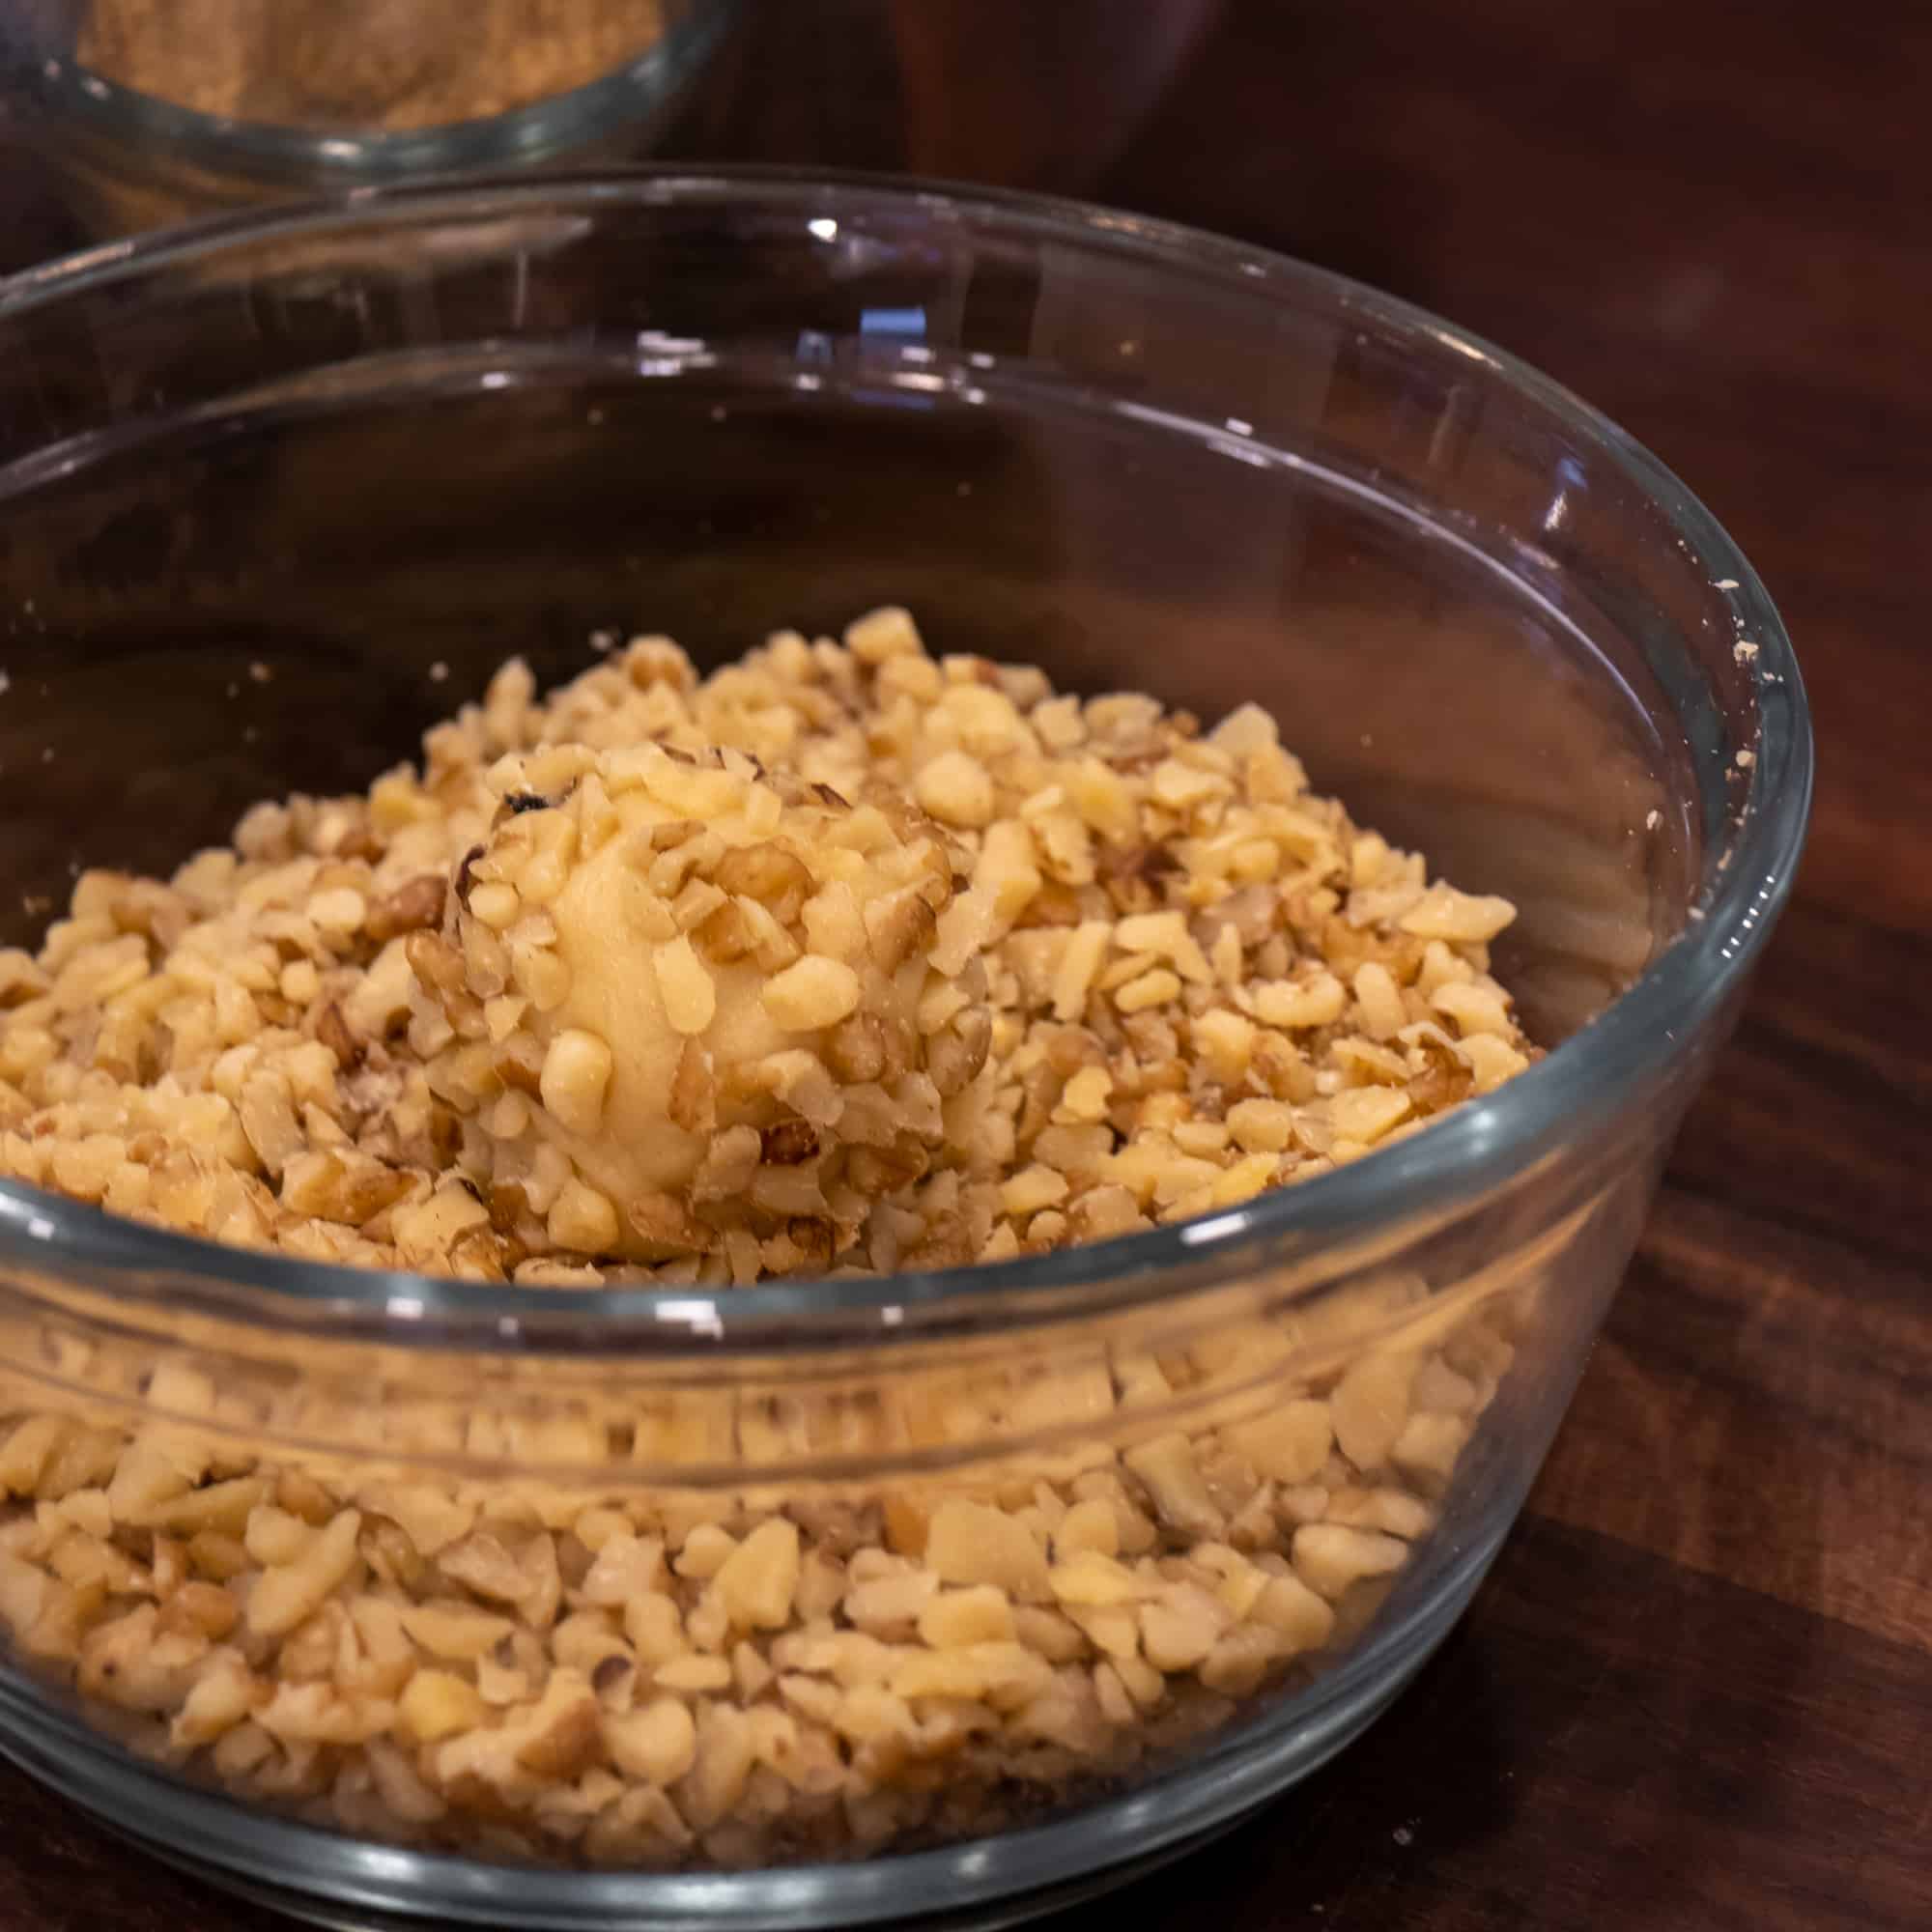 Roll the ball of dough in a bowl of chopped walnuts.